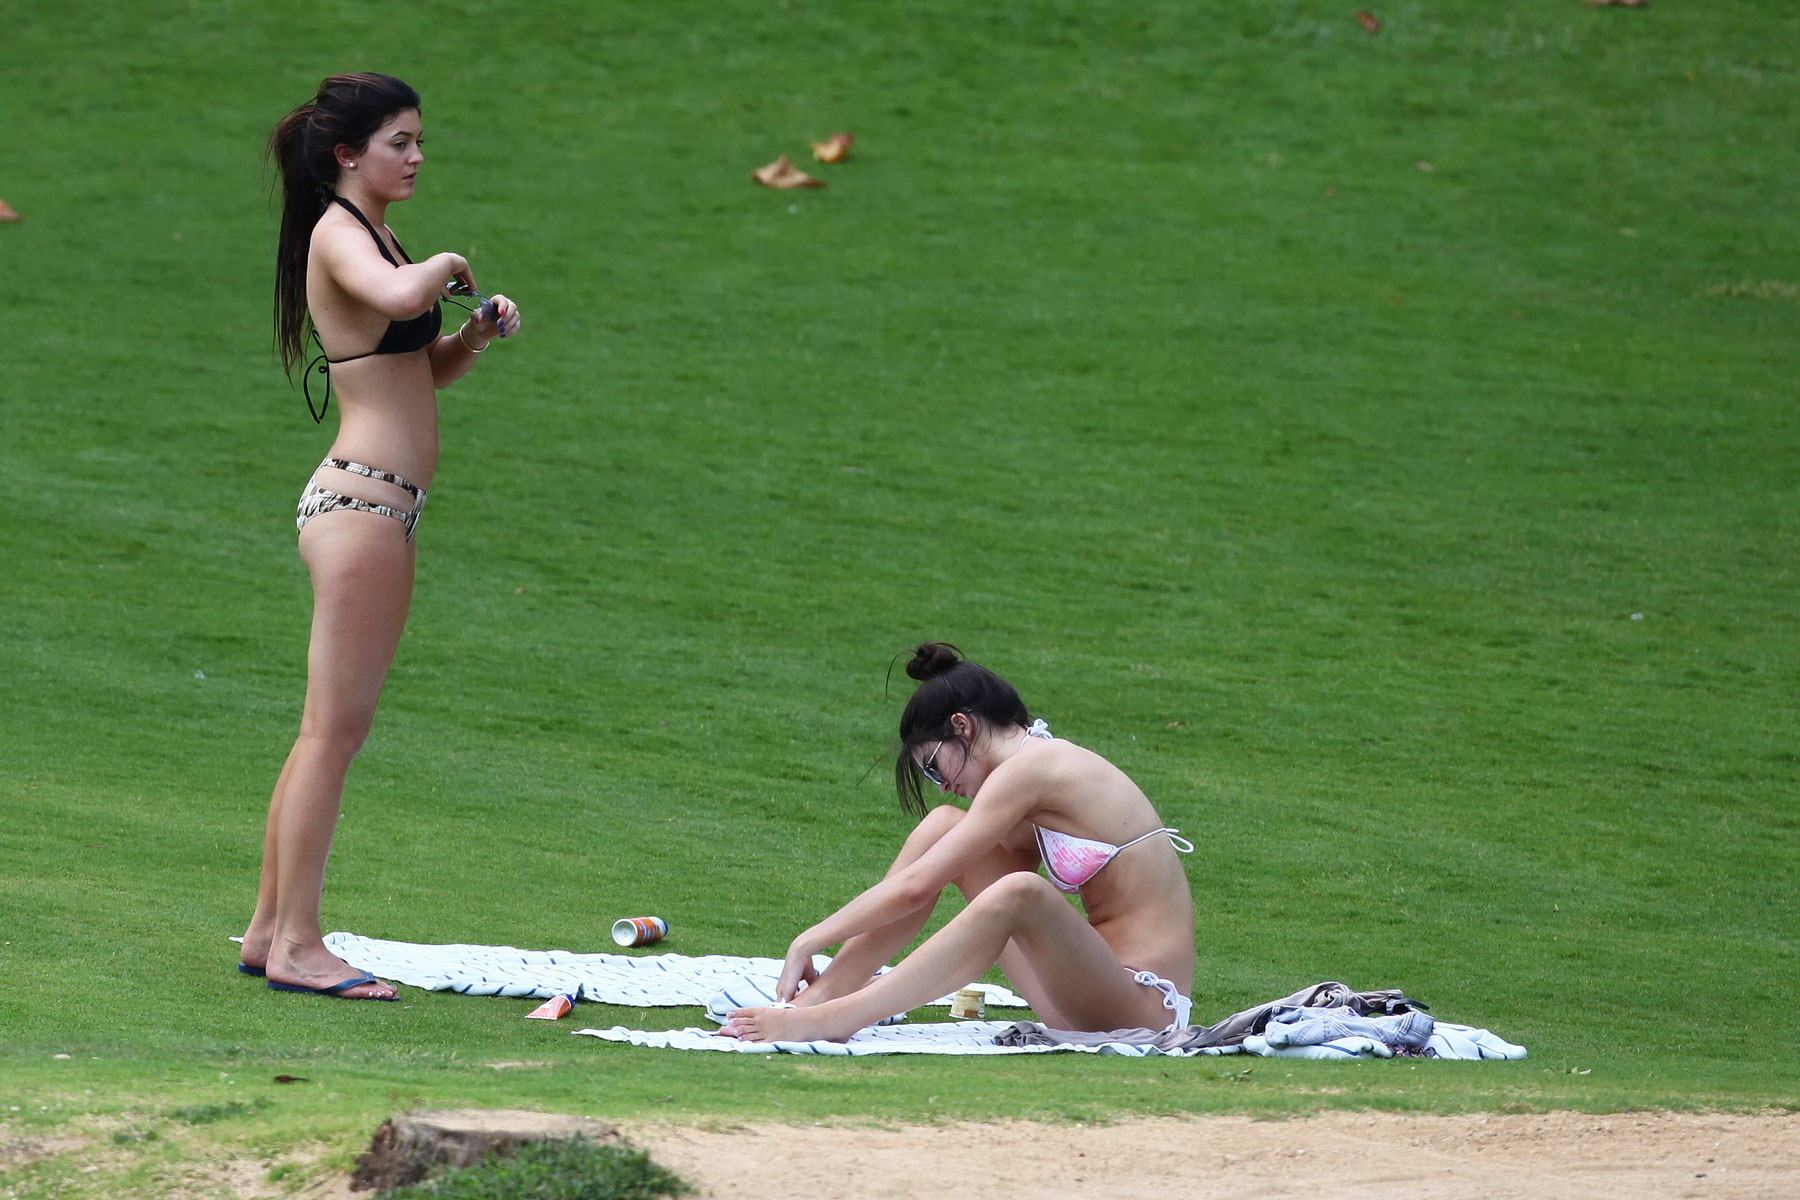 Kylie and Kendall Jenner tanning their hot bodies in skimpy bikini sets on a mea #75174068